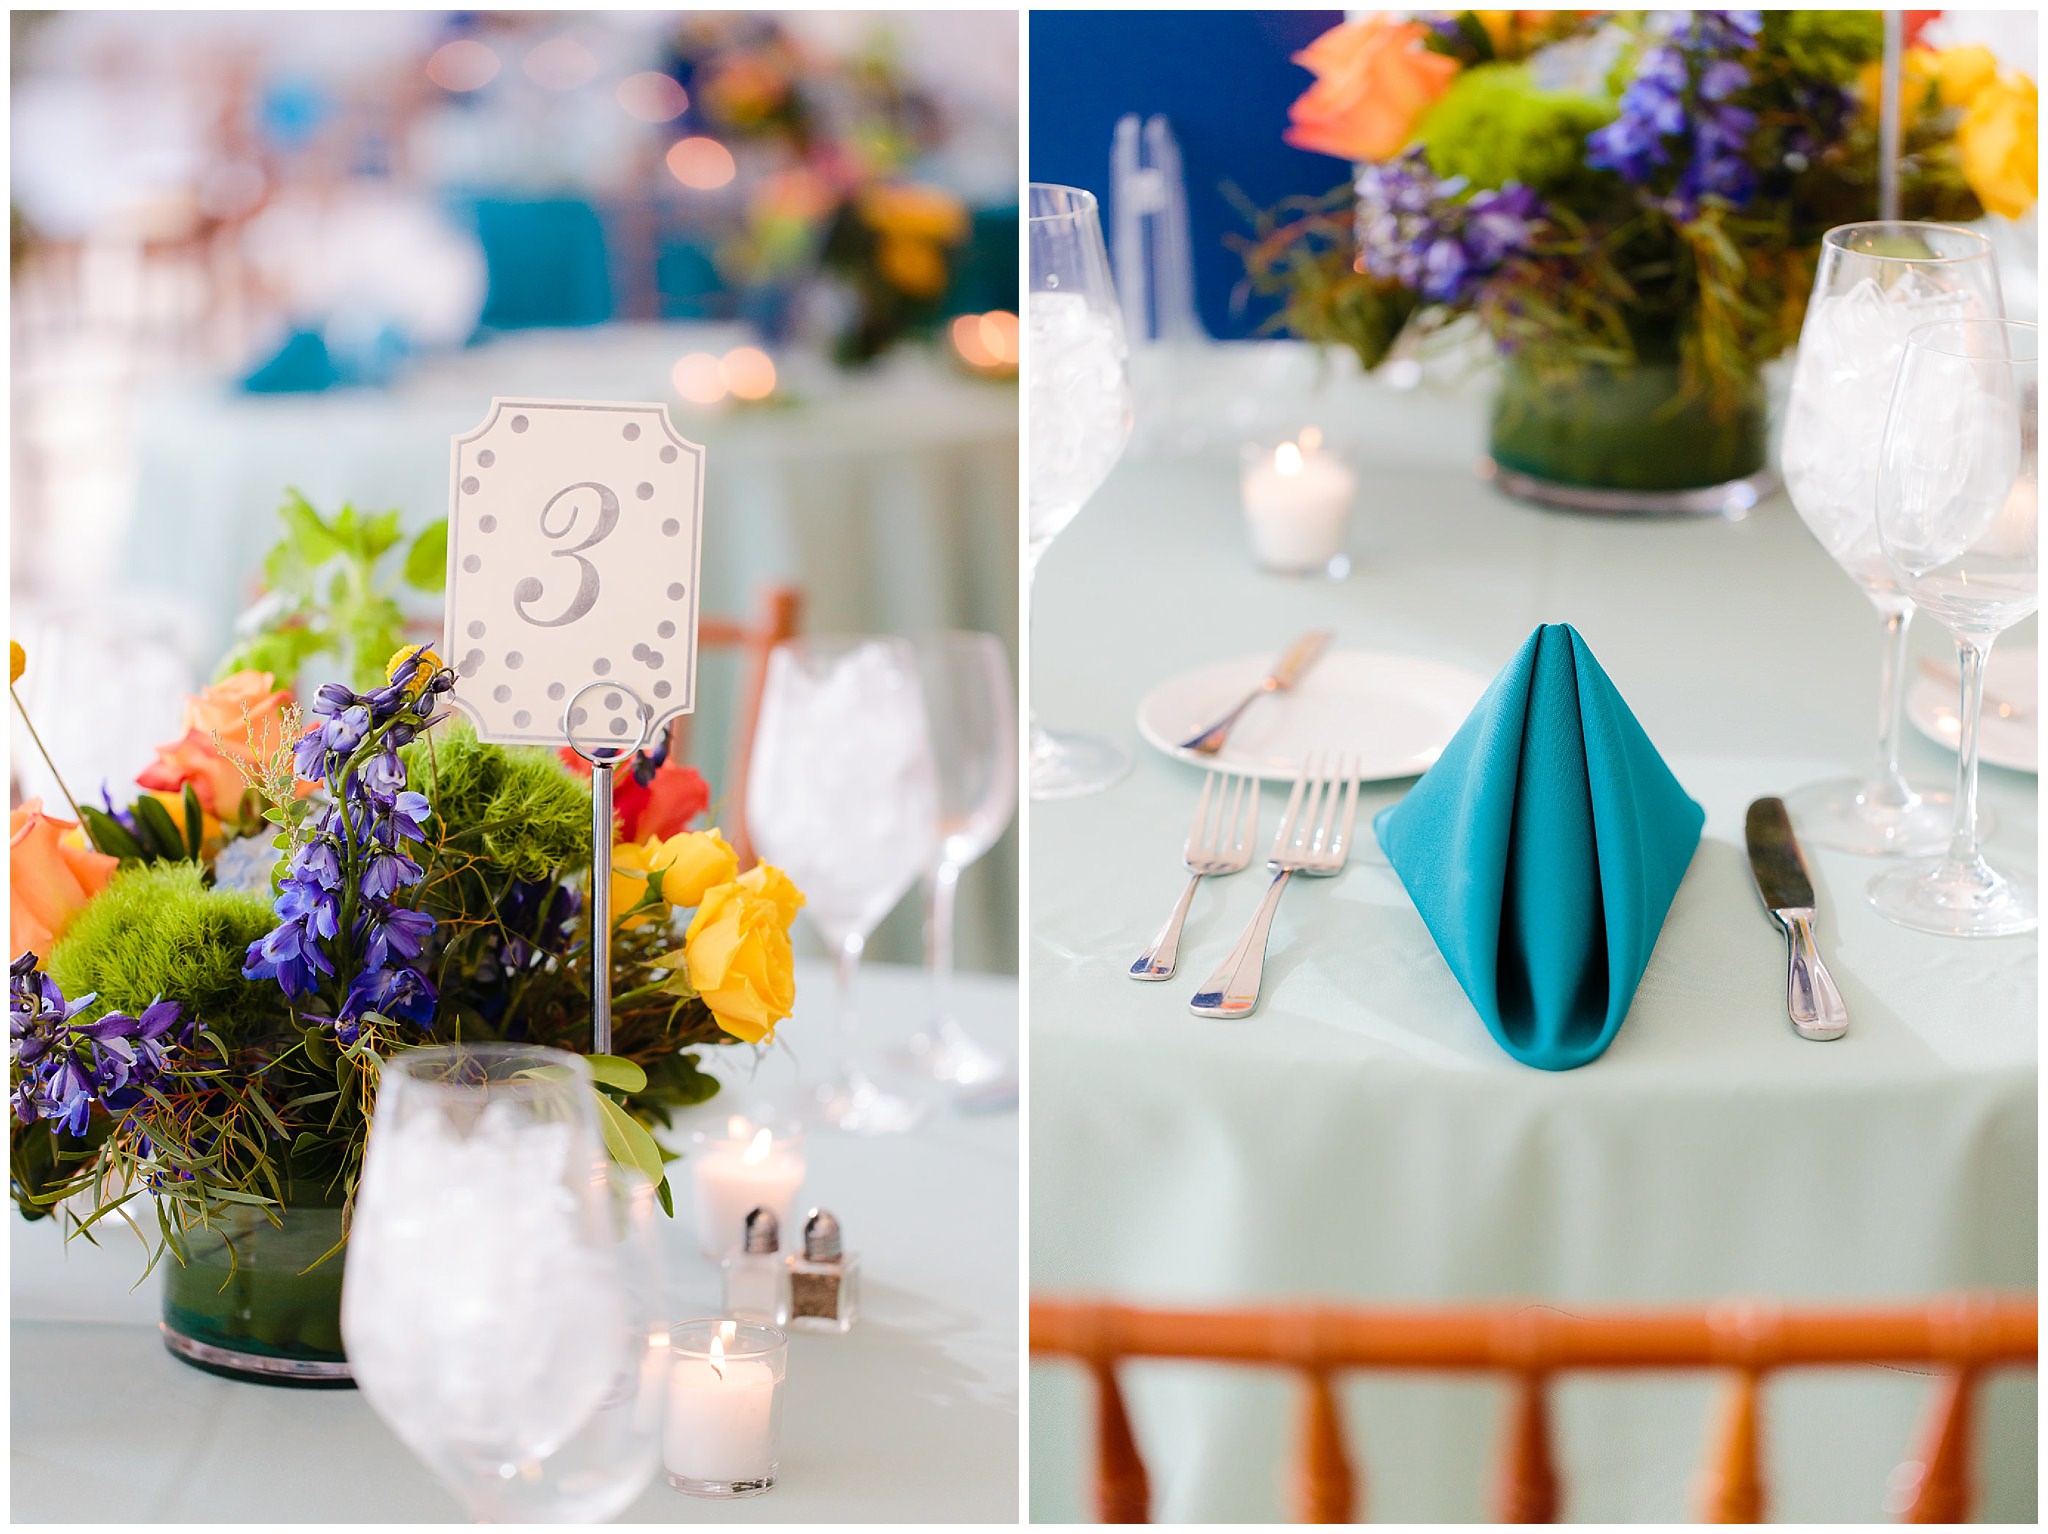 Color turquoise, orange, yellow, & red wedding reception details at Phipps Conservatory